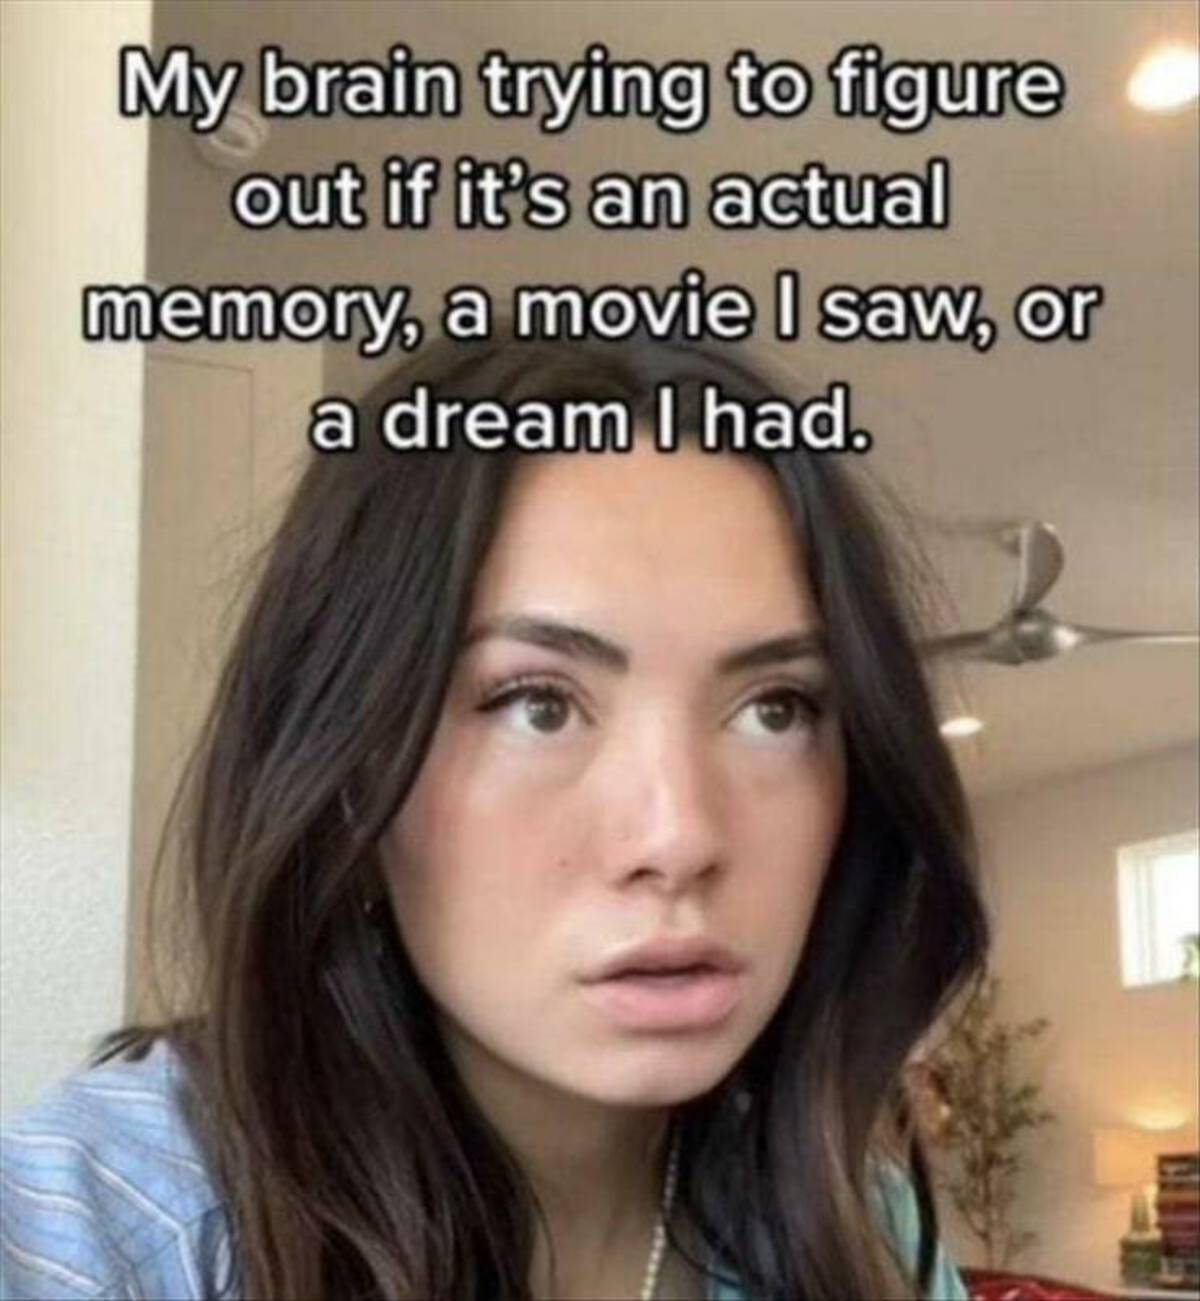 photo caption - My brain trying to figure out if it's an actual memory, a movie I saw, or a dream I had.